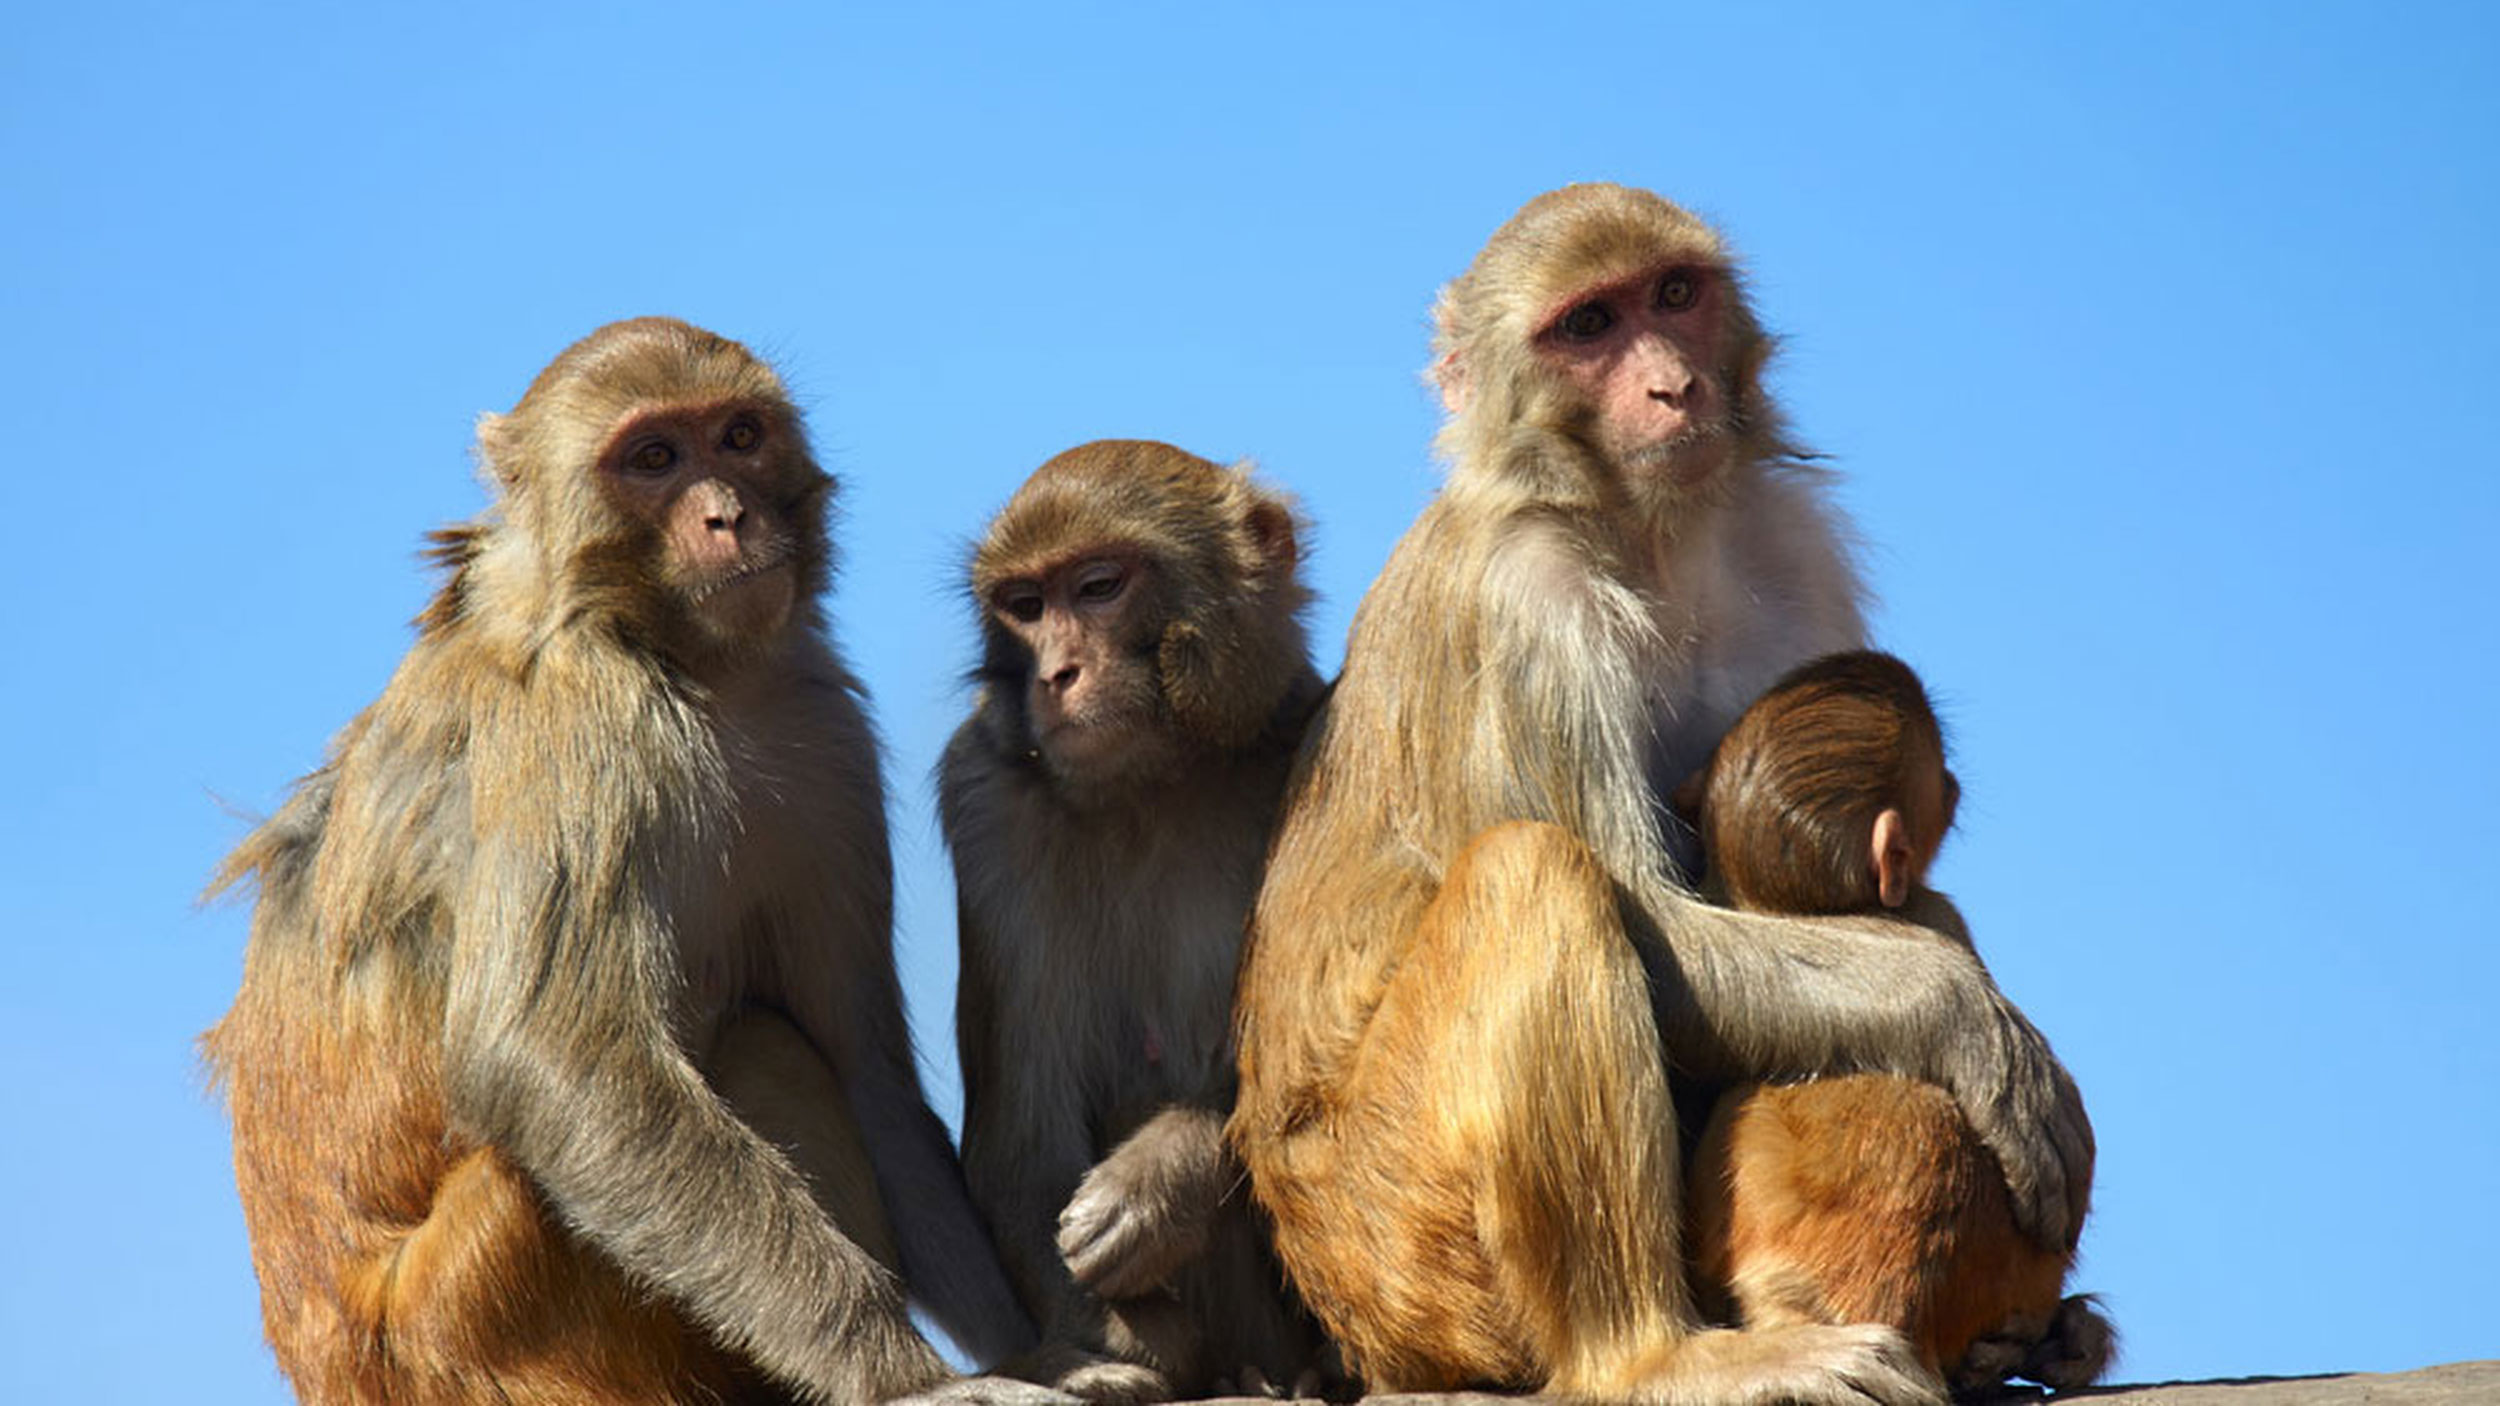 A number of rhesus monkeys in Madhya Pradesh died of hyper-thermia after a group of larger, stronger monkeys denied them access to a river. The tragic incident seems to foreshadow the future of human civilization as well